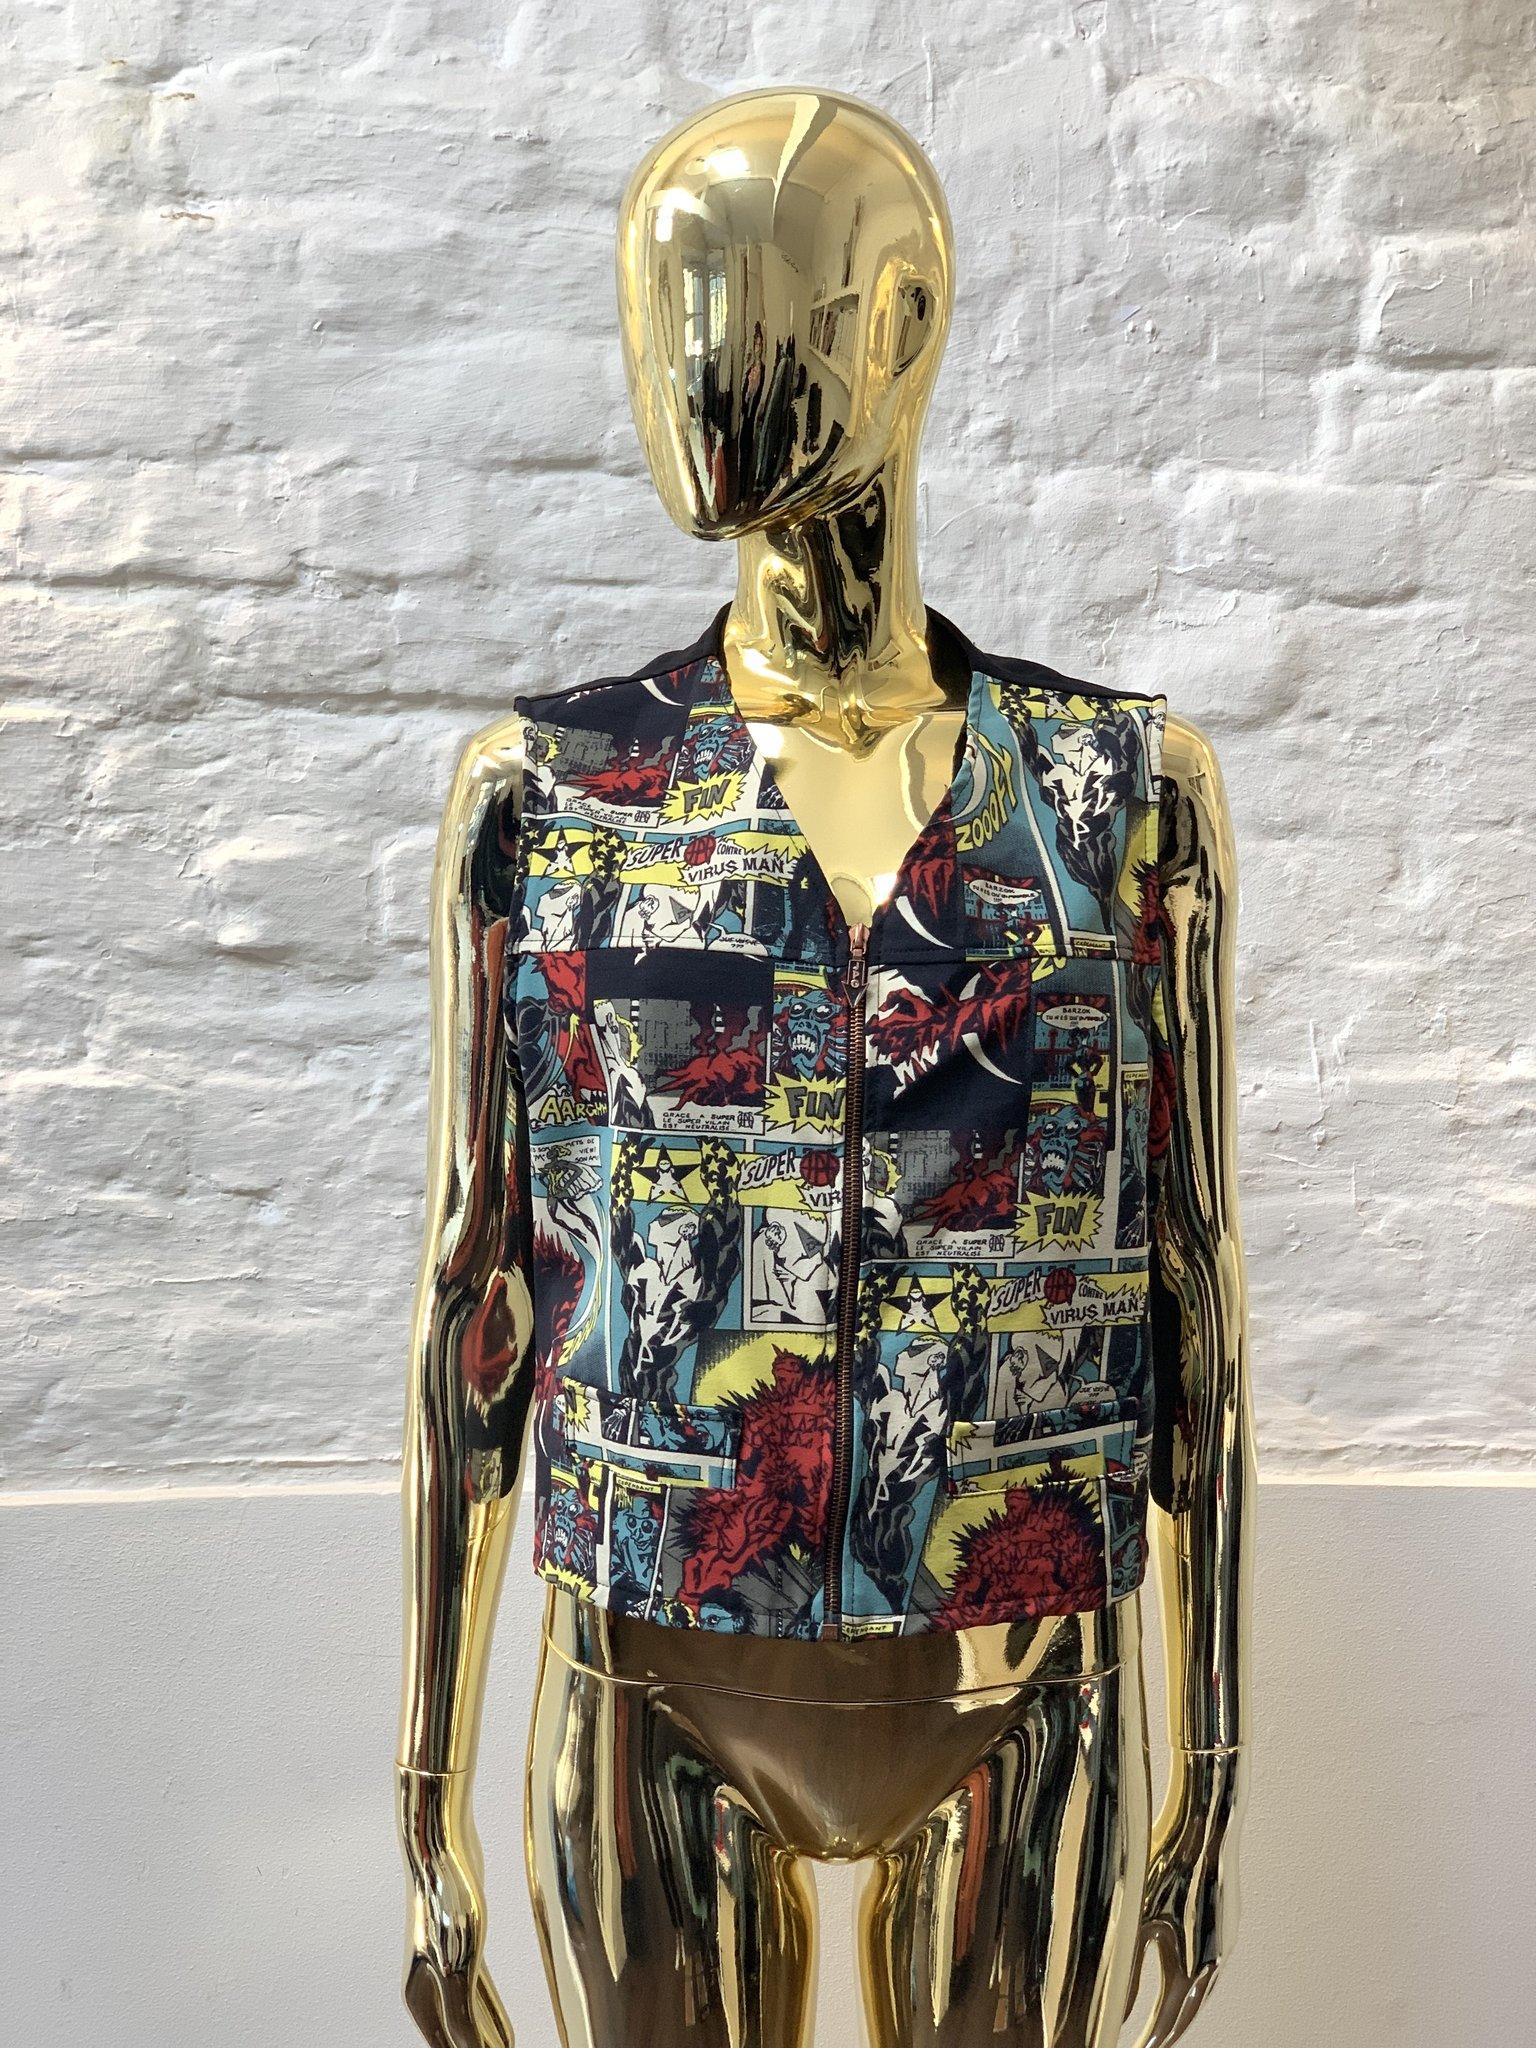 Jean Paul Gaultier Comic Print Waistcoat made in France from cotton. 

Jean Paul Gaultier disrupted the rarefied world of couture with his transgressive vision of beauty.

Inspired by punks, burlesque, screen goddesses, gender-benders, fetishists